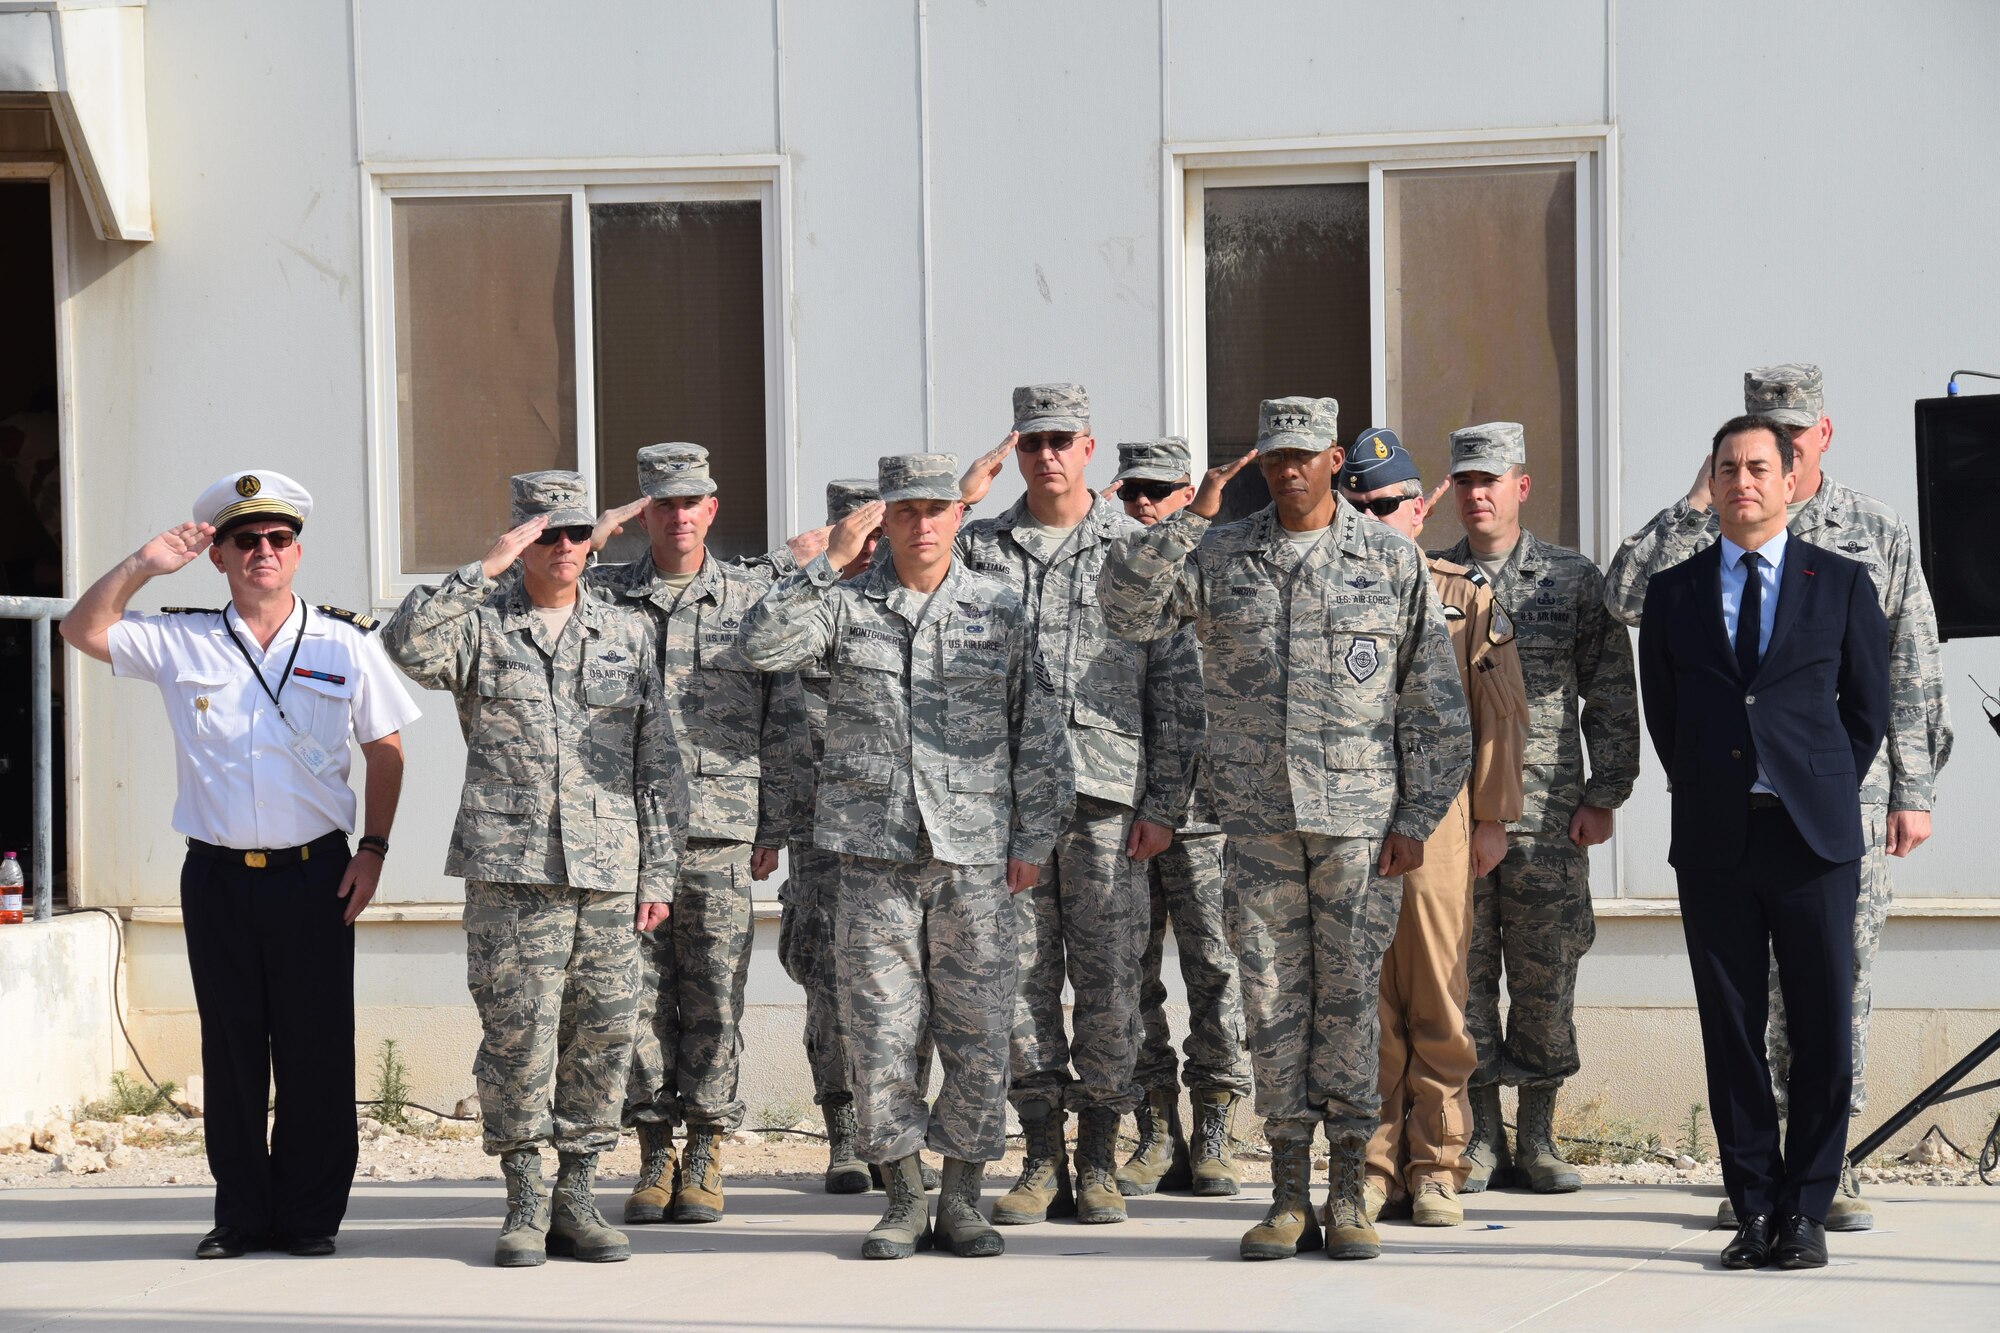 Coalition military members salute  during the raising of the French flag, known as the Tricolour, during the Bastille Day ceremony July 14, 2016, at Al Udeid Air Base, Qatar. France is one of 20 nations supporting the air Coalition that provides decisive air and space power to combat Daesh and other terrorist organizations and ensure the stability of the Southwest Asia region. (U.S. Air Force photo/Technical Sgt. Carlos J. Treviño/Released)